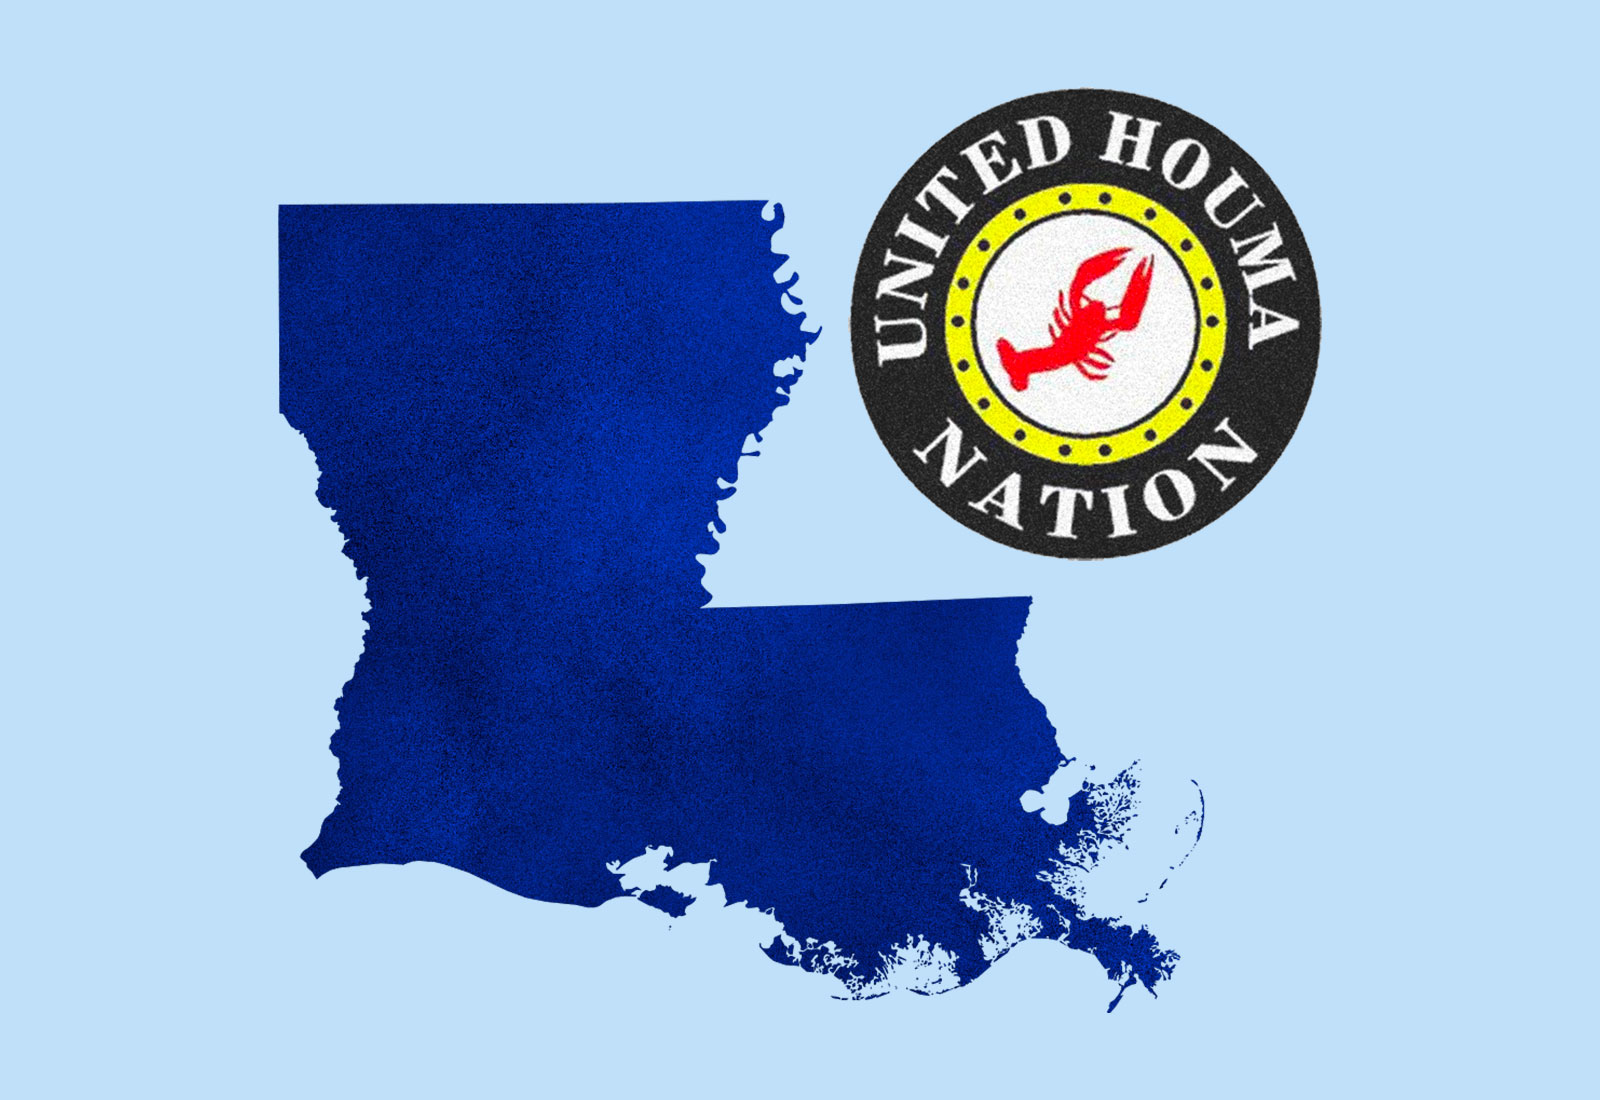 Collage: Silhouette of Louisiana state and the logo of the United Houma Nation